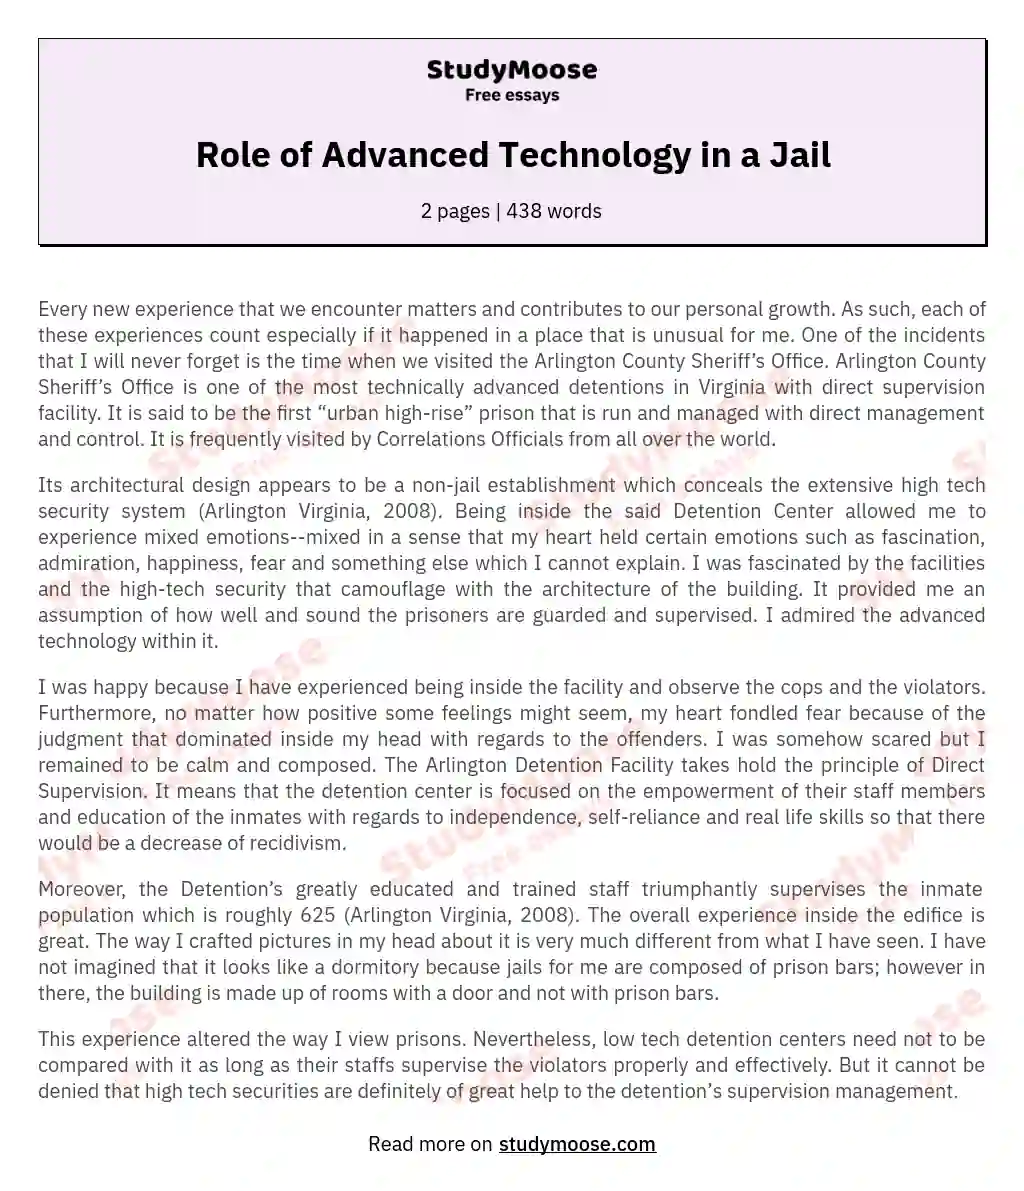 Role of Advanced Technology in a Jail